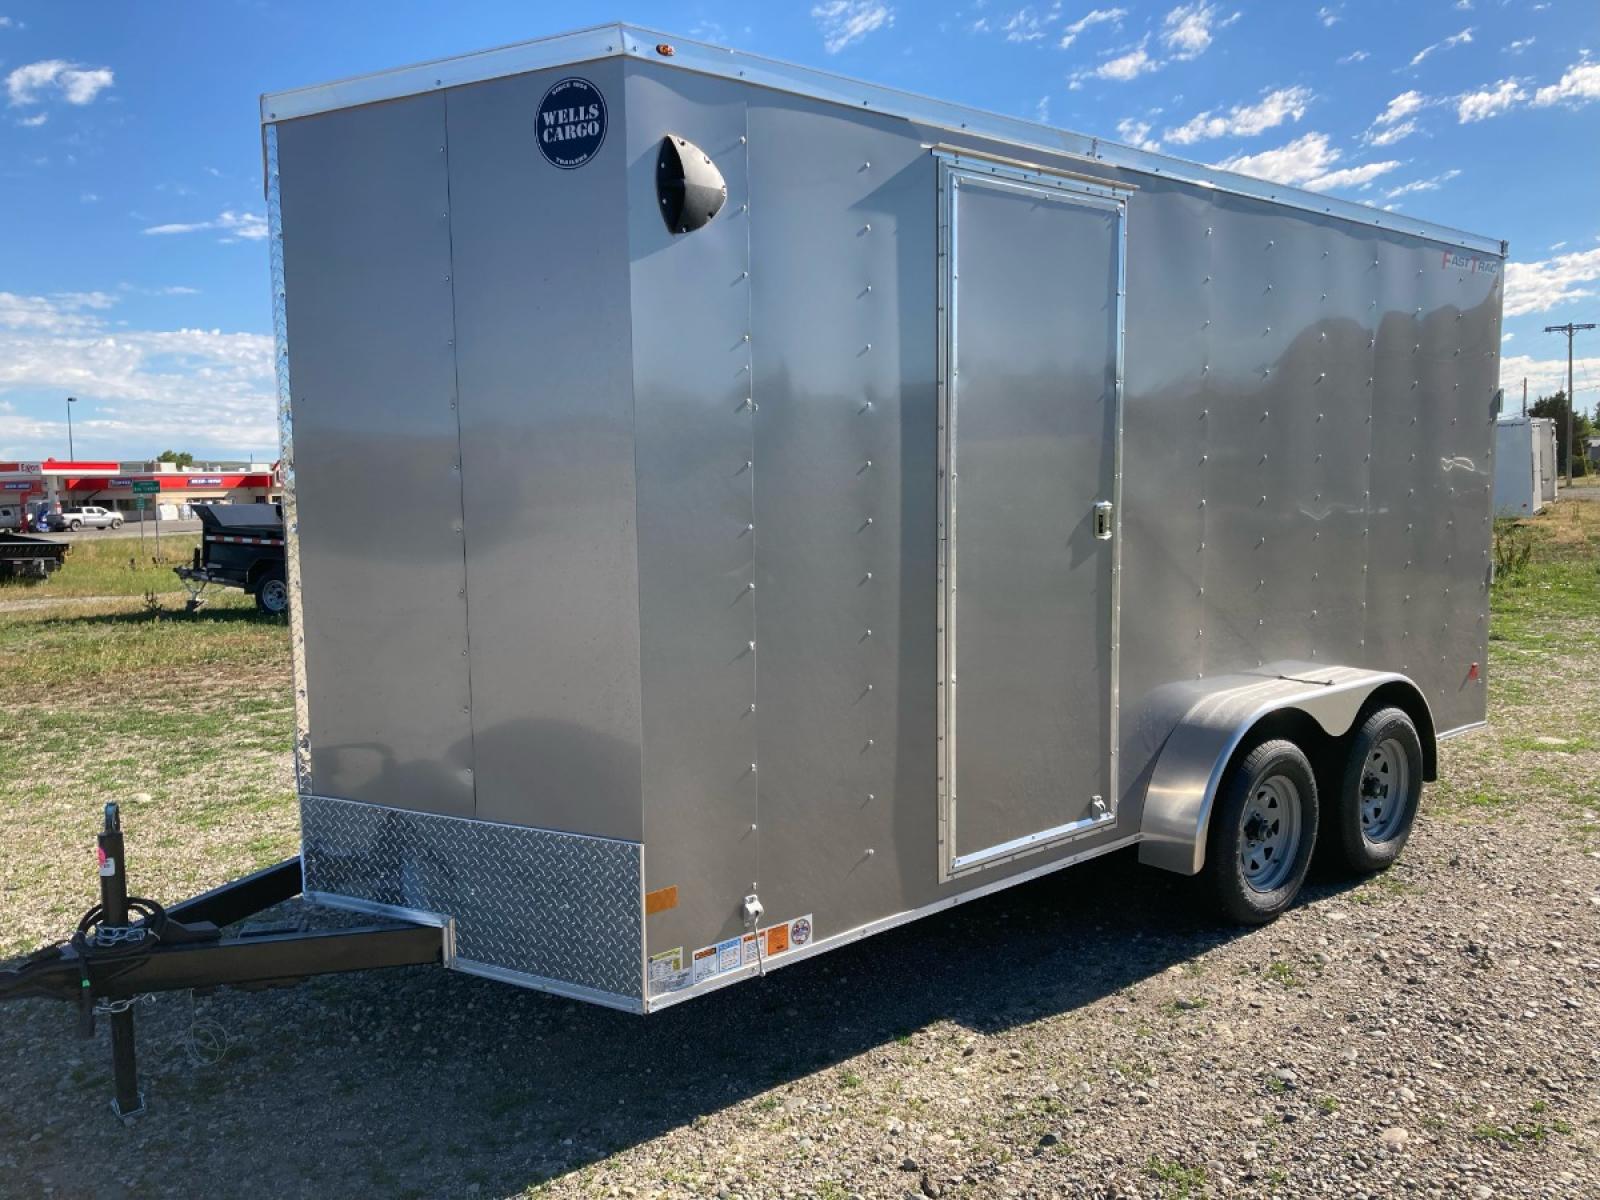 2022 White Wells Cargo Fast Trac 7 x 14 , located at 310 West 1st Ave, Big Timber, MT, 59011, (406) 860-8510, 45.833511, -109.957809 - Wells Cargo Fast Trac 7 x 14 V-nose, 7k GVW, rear ramp door with 78" rear door opening height (fits a side by side), spring suspension, electric brakes all wheels, 15" radial tires, ez lube hubs, (4) d-ring tie-downs, Plexcore 3/4" floor, economy sidewall liner, flow through sidewall vents, one piec - Photo #0